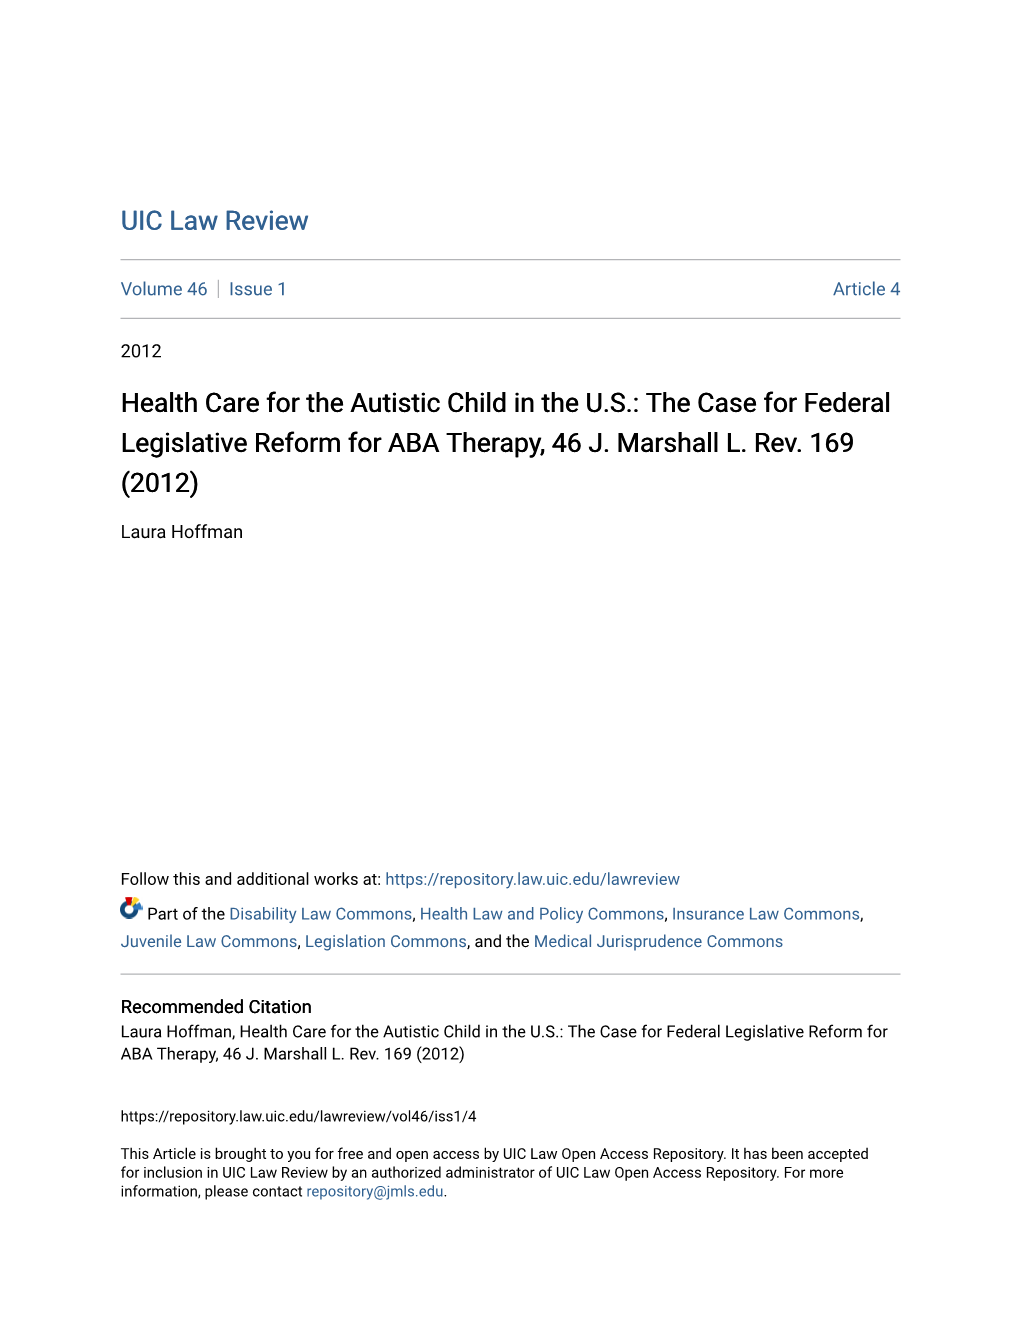 Health Care for the Autistic Child in the US